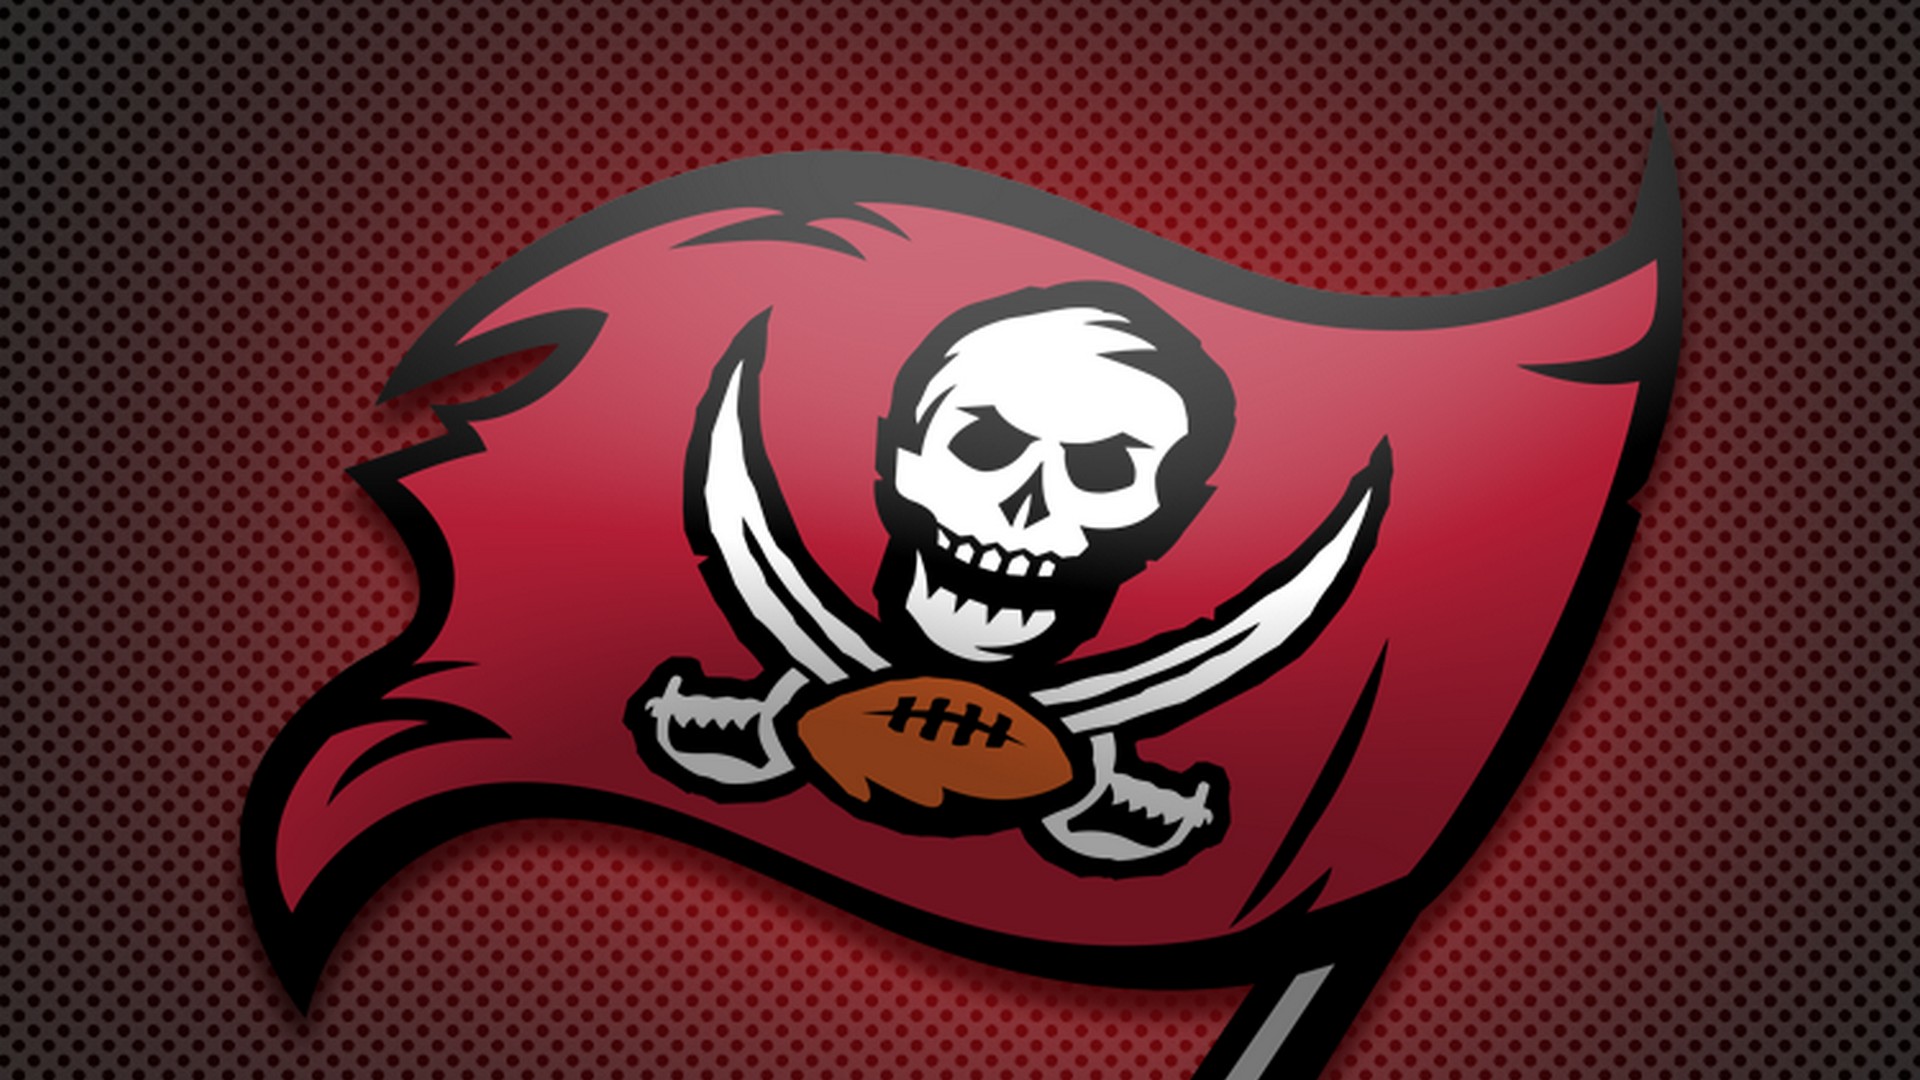 Tampa Bay Buccaneers Logo Desktop Wallpapers with high-resolution 1920x1080 pixel. You can use this wallpaper for your Mac or Windows Desktop Background, iPhone, Android or Tablet and another Smartphone device